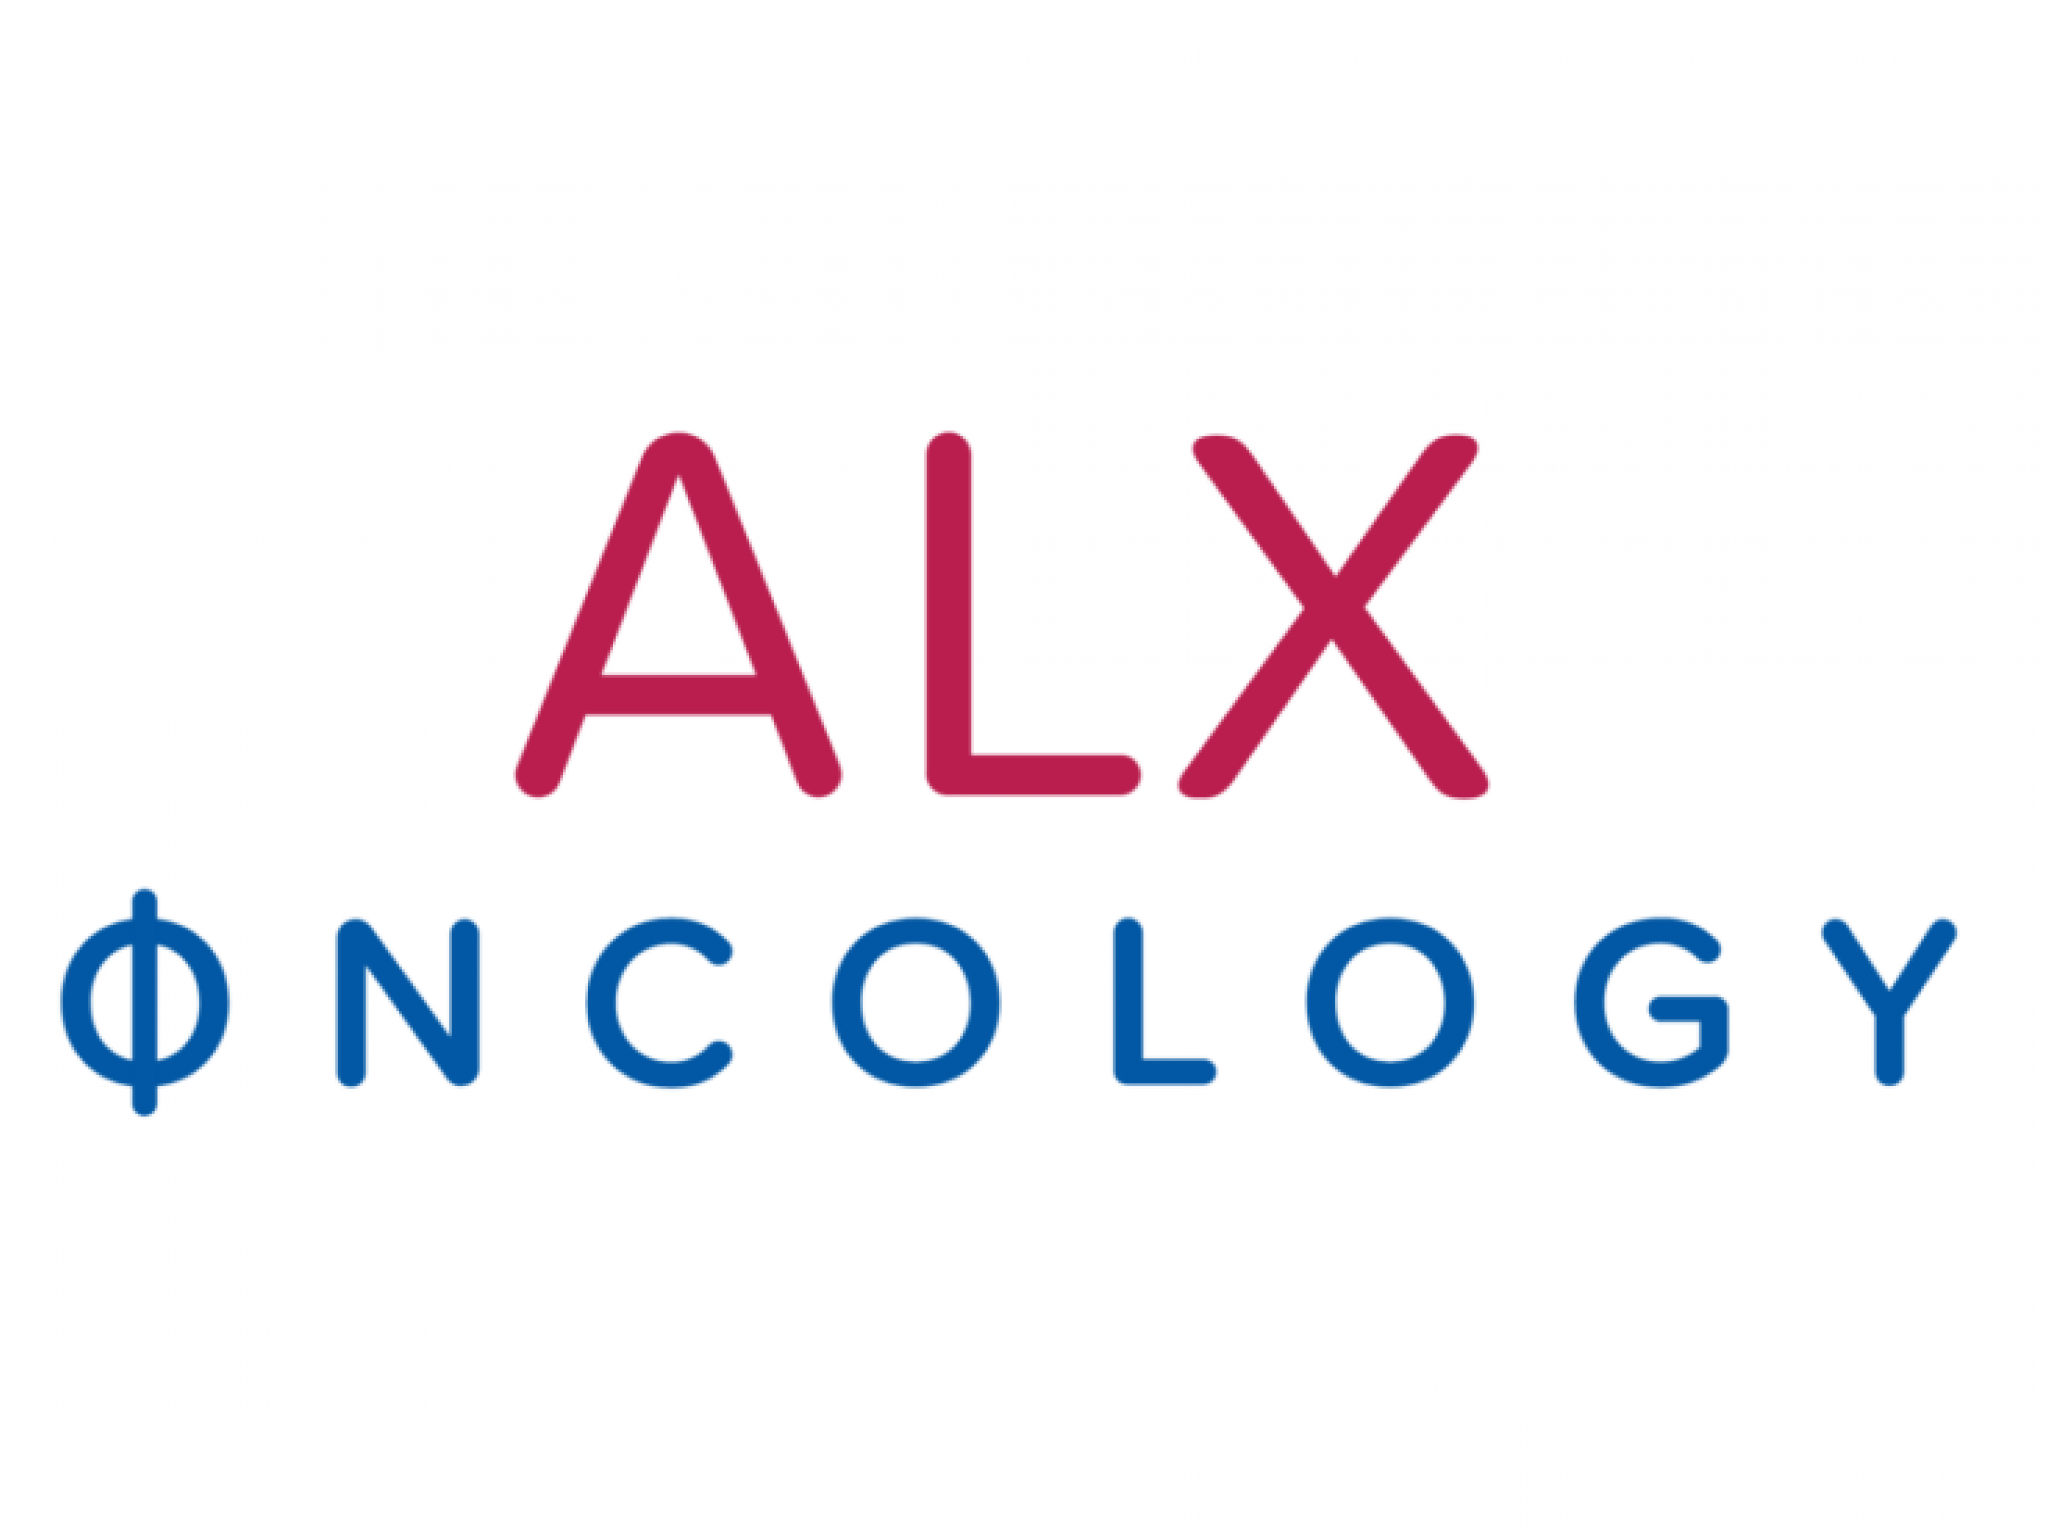  alx-oncology-has-elevated-valuation---analyst-downgrades-stock-highlights-need-for-development-de-risking-beyond-gastric-cancer 